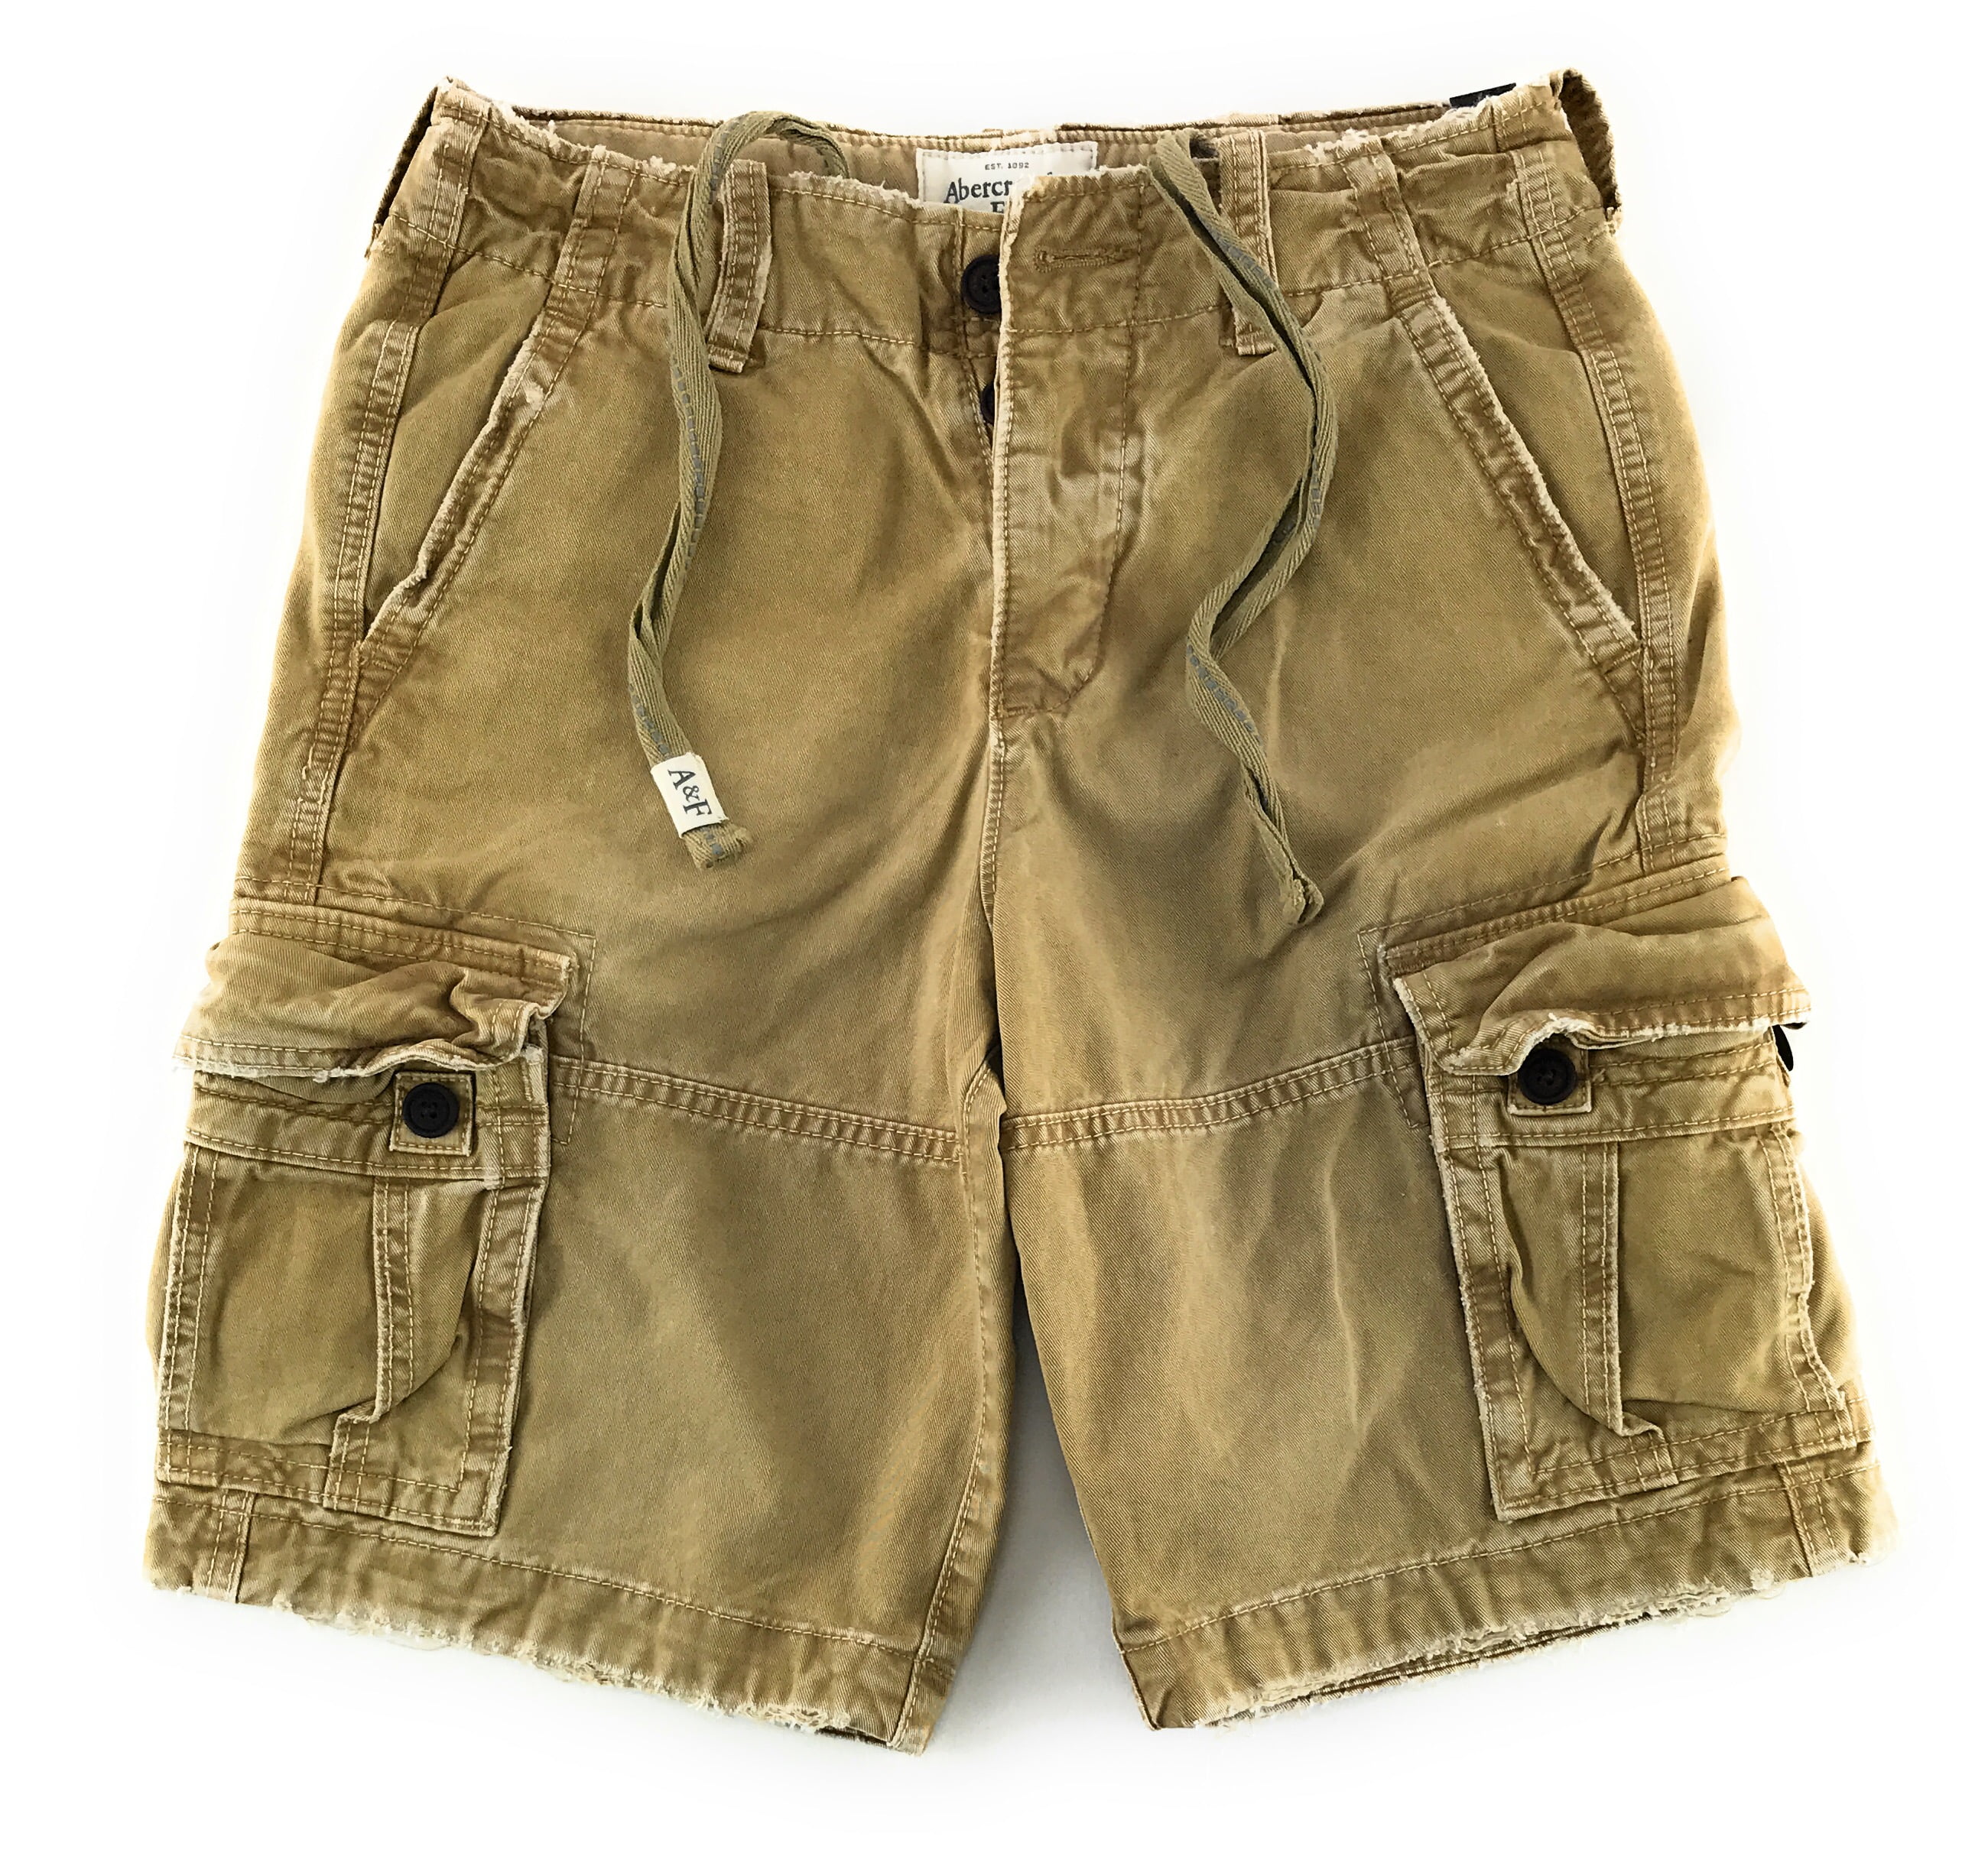 Abercrombie & Fitch Mens Cargo Shorts